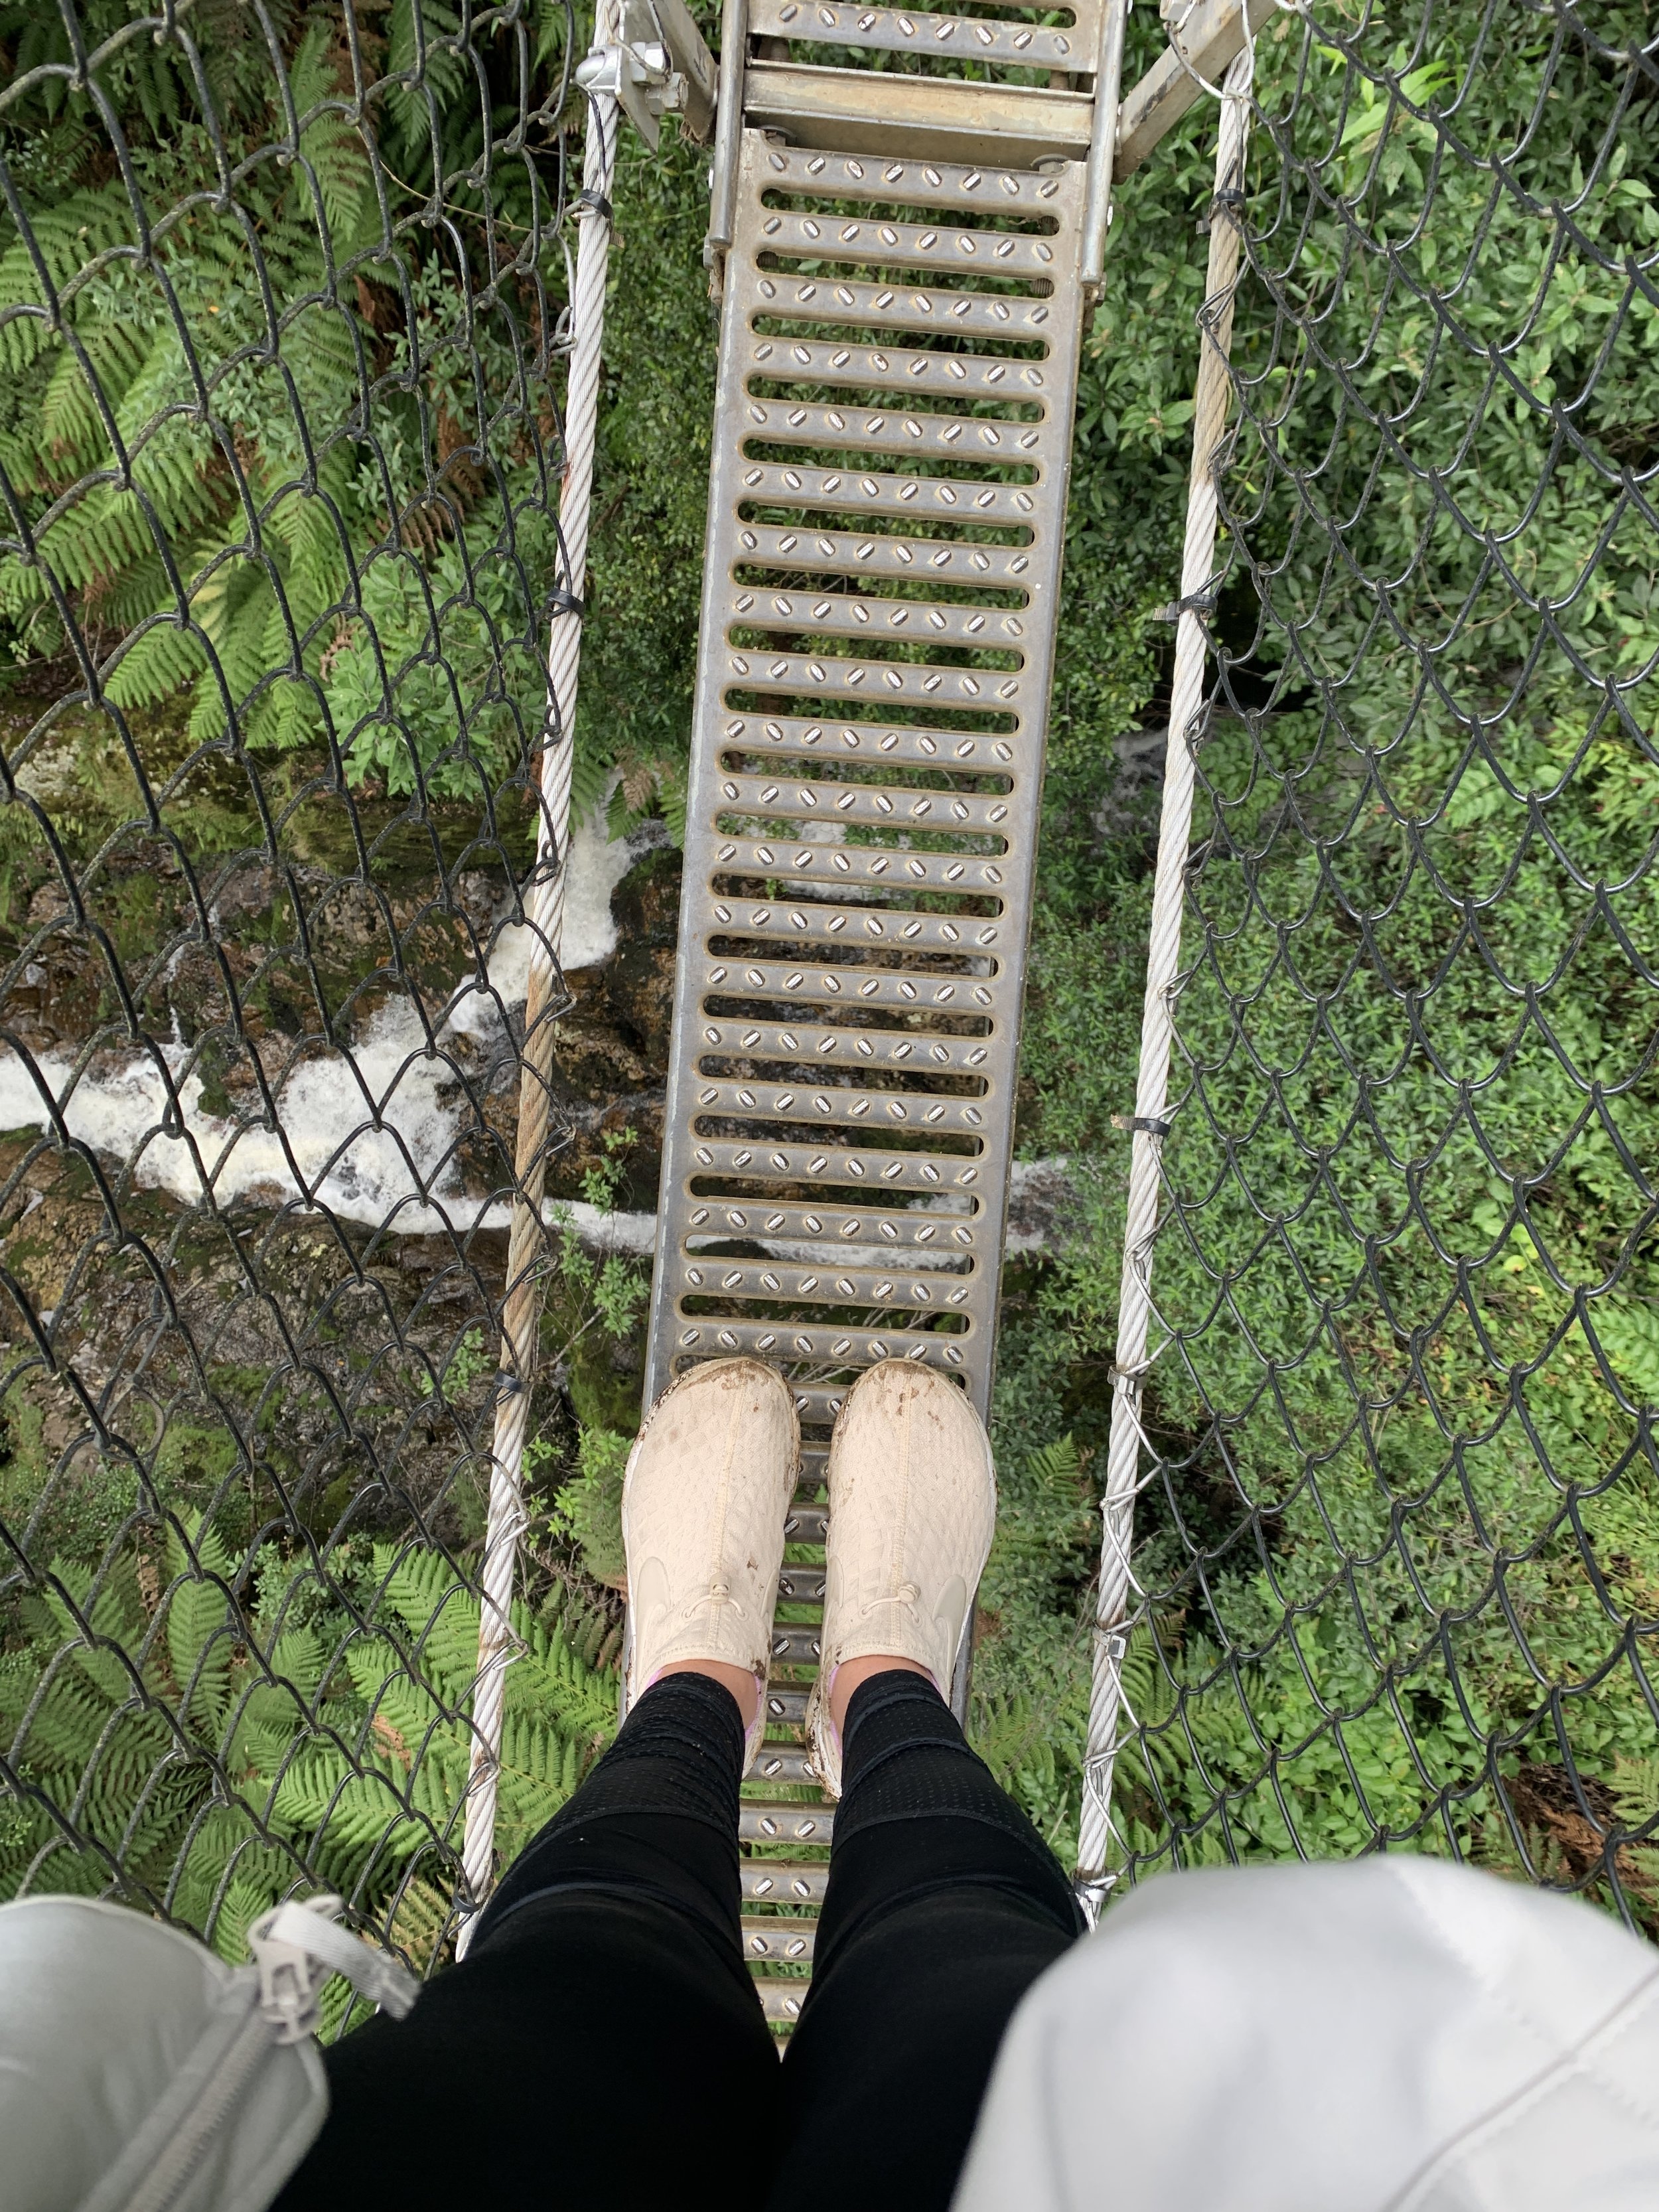 From the bridge - ok so maybe the shoes aren't that dirty